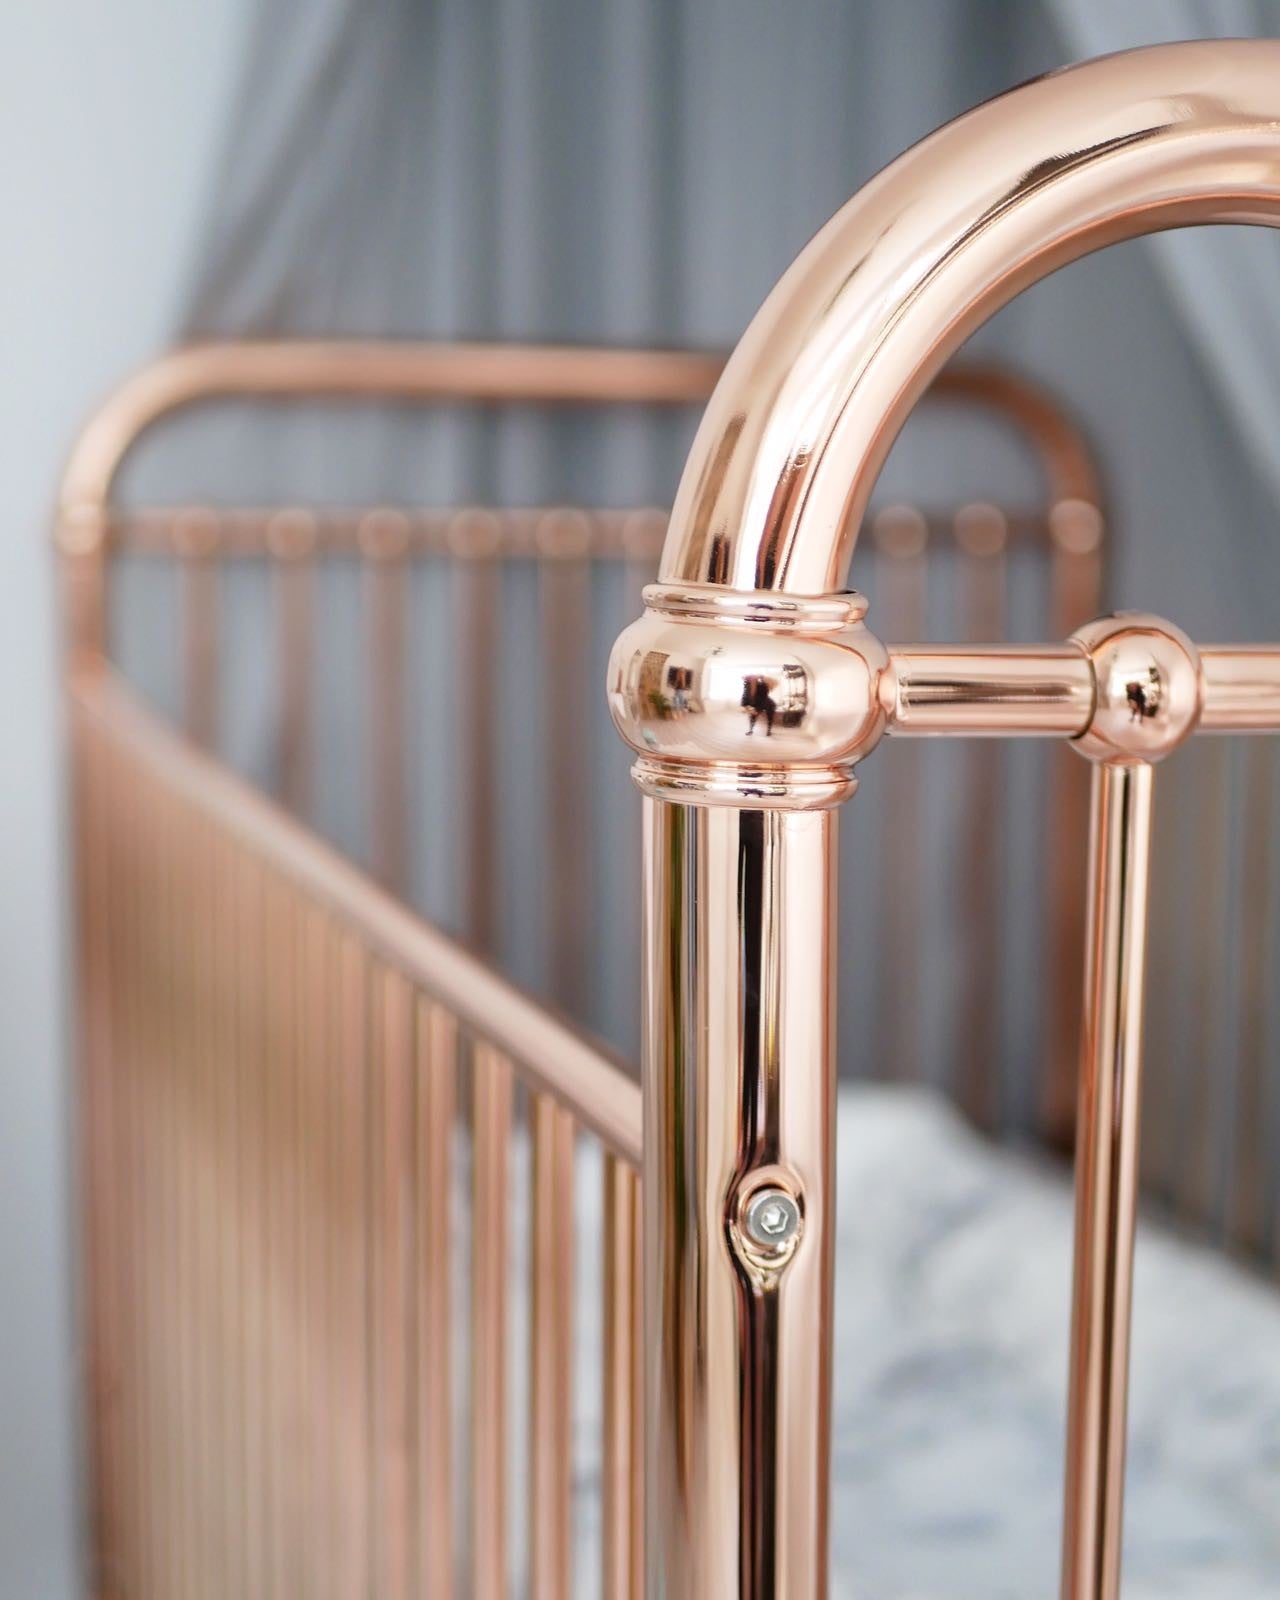 Incy Interiors Rose Gold Baby Cot